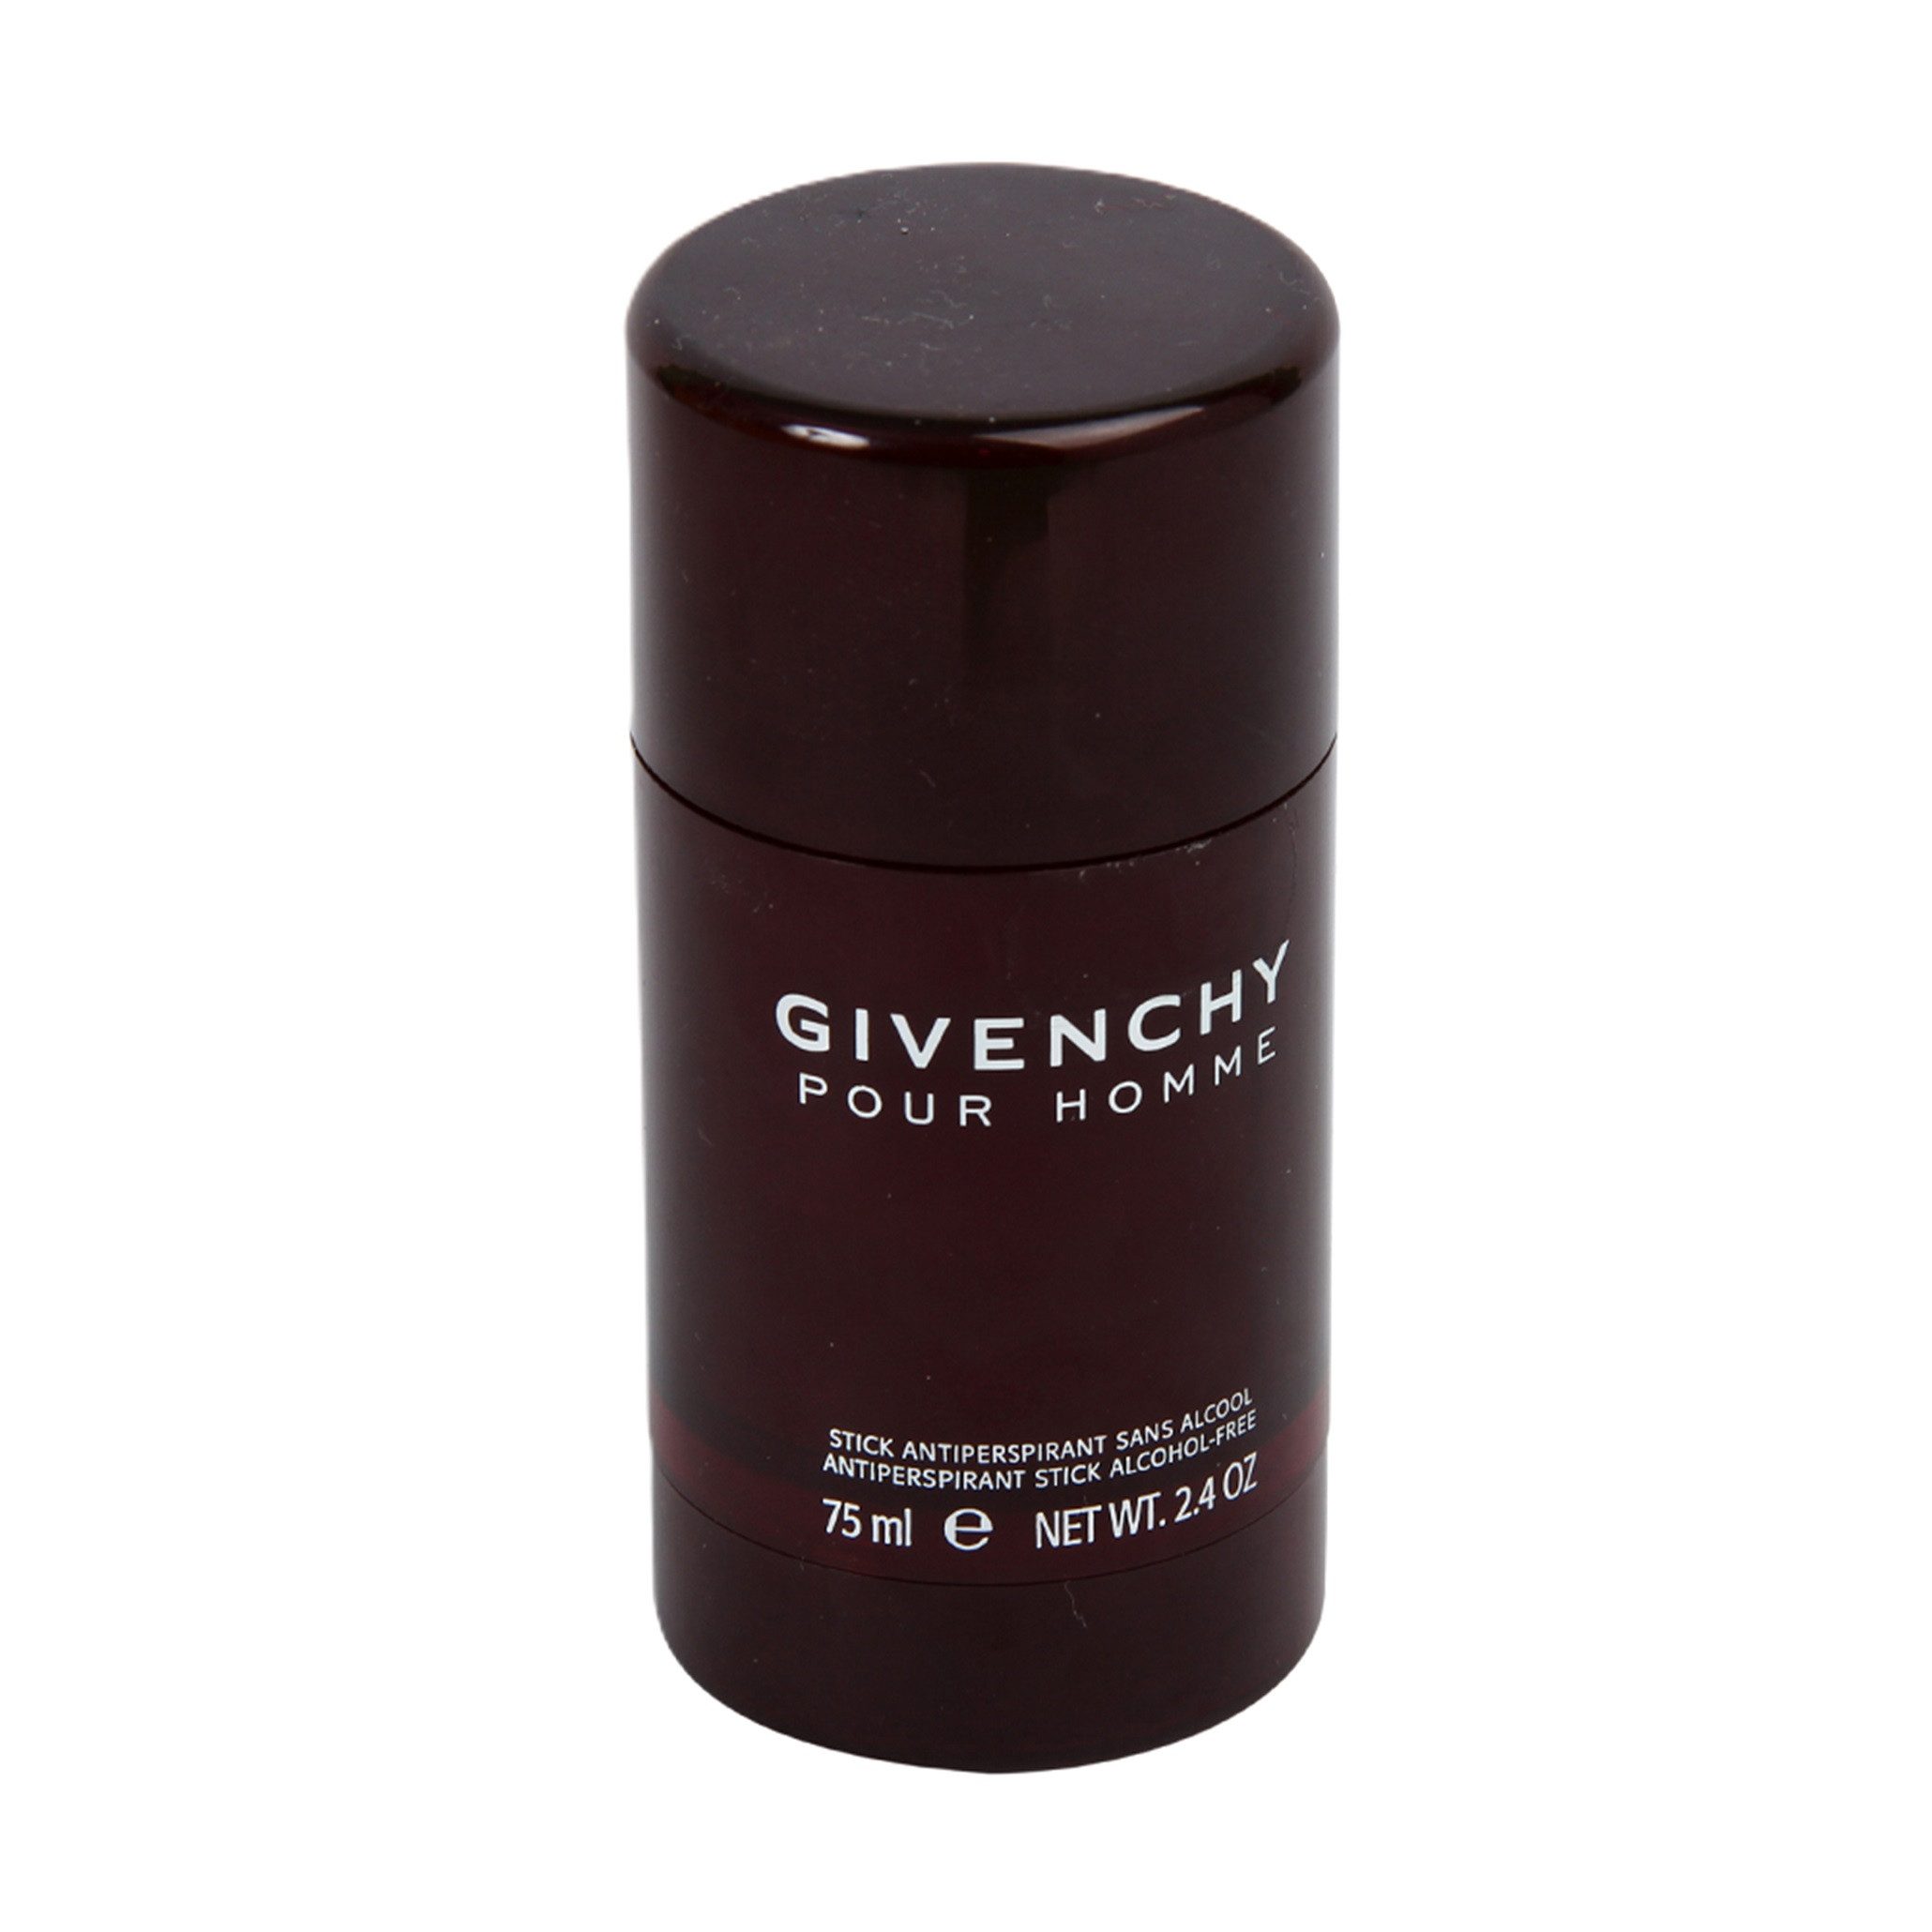 GIVENCHY Deo-Stift GIVENCHY POUR HOMME Deodorant Stick 75 ml